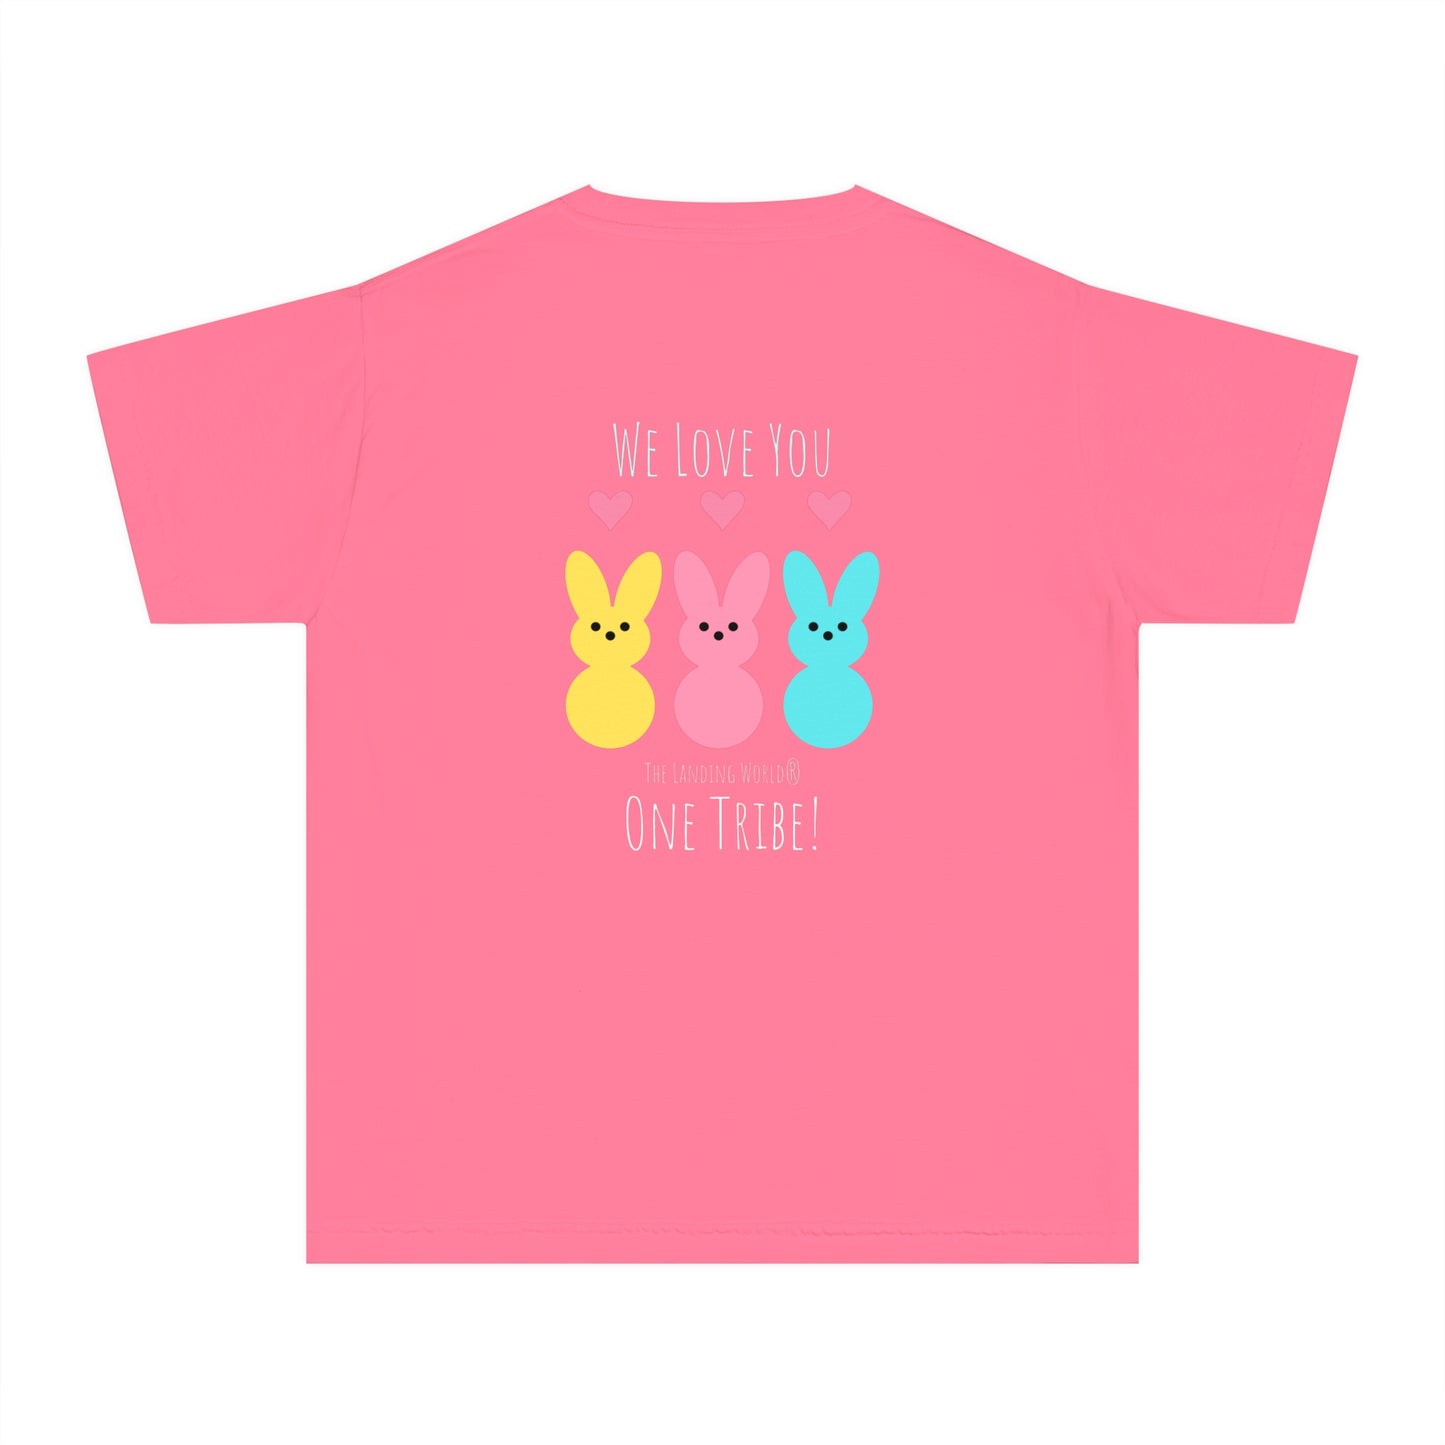 We Love You Kids T'Shirt, One Tribe T'Shirt for Kids